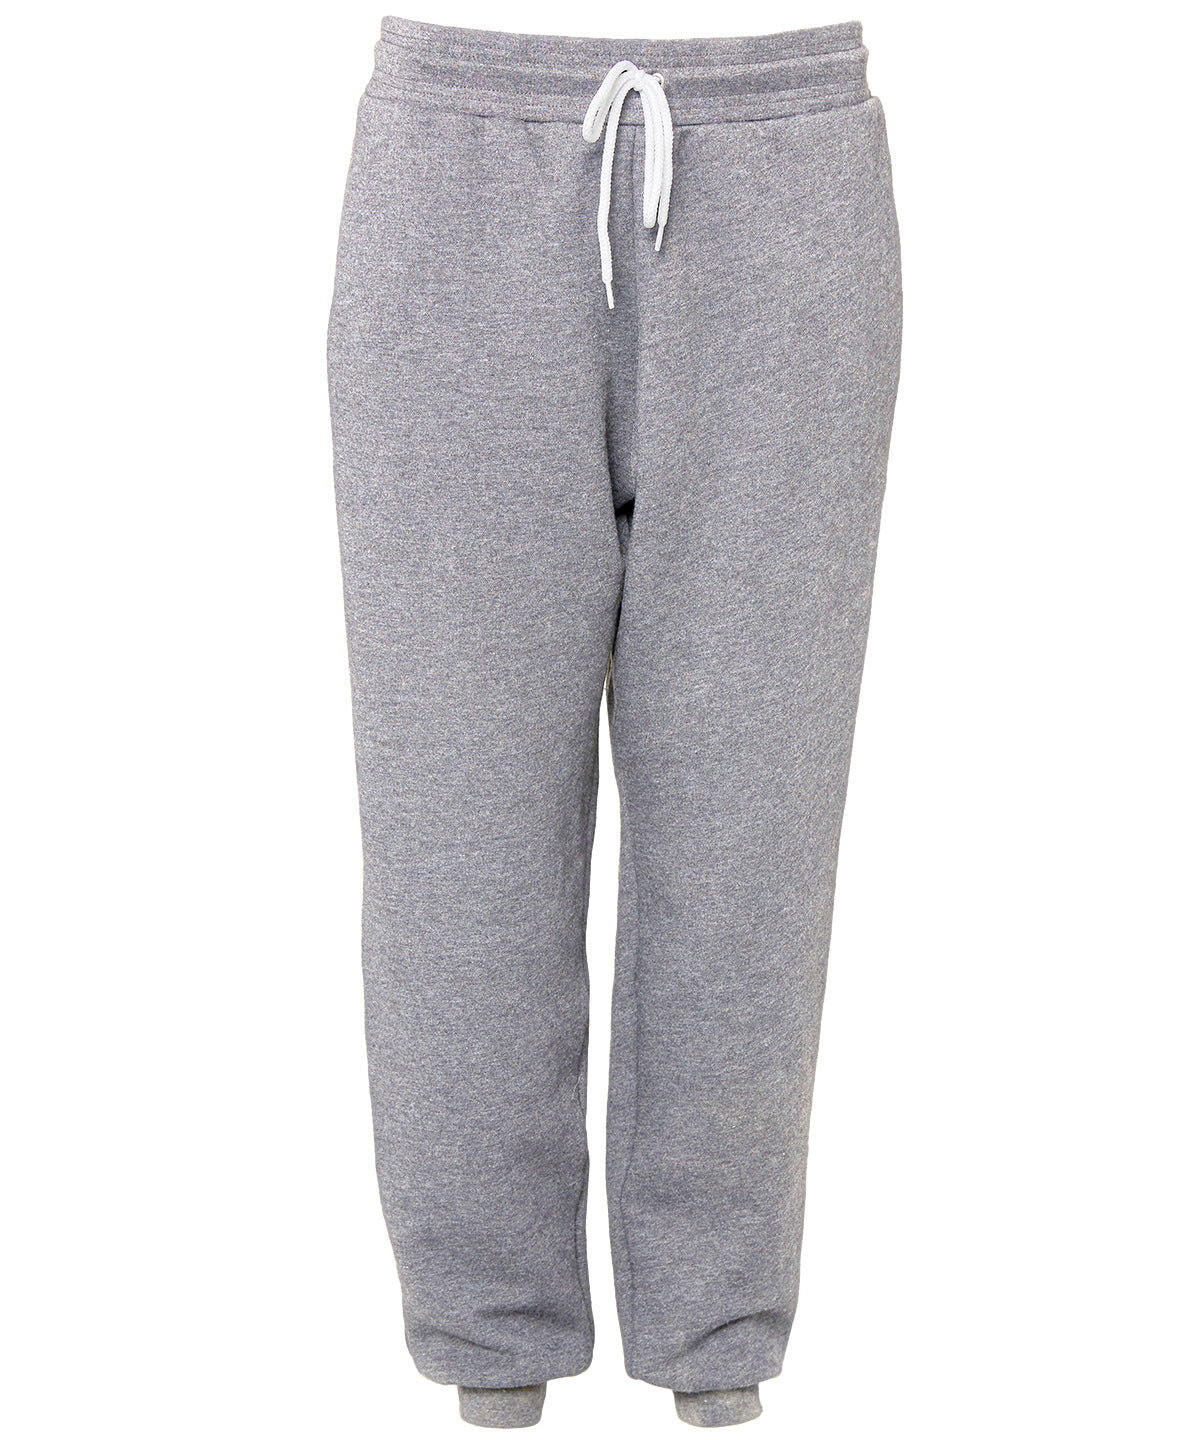 Bella+Canvas CA3727 Unisex Jogger softest fleece fabric Sweatpants Side pockets Ribbed ankle cuff - COOZO